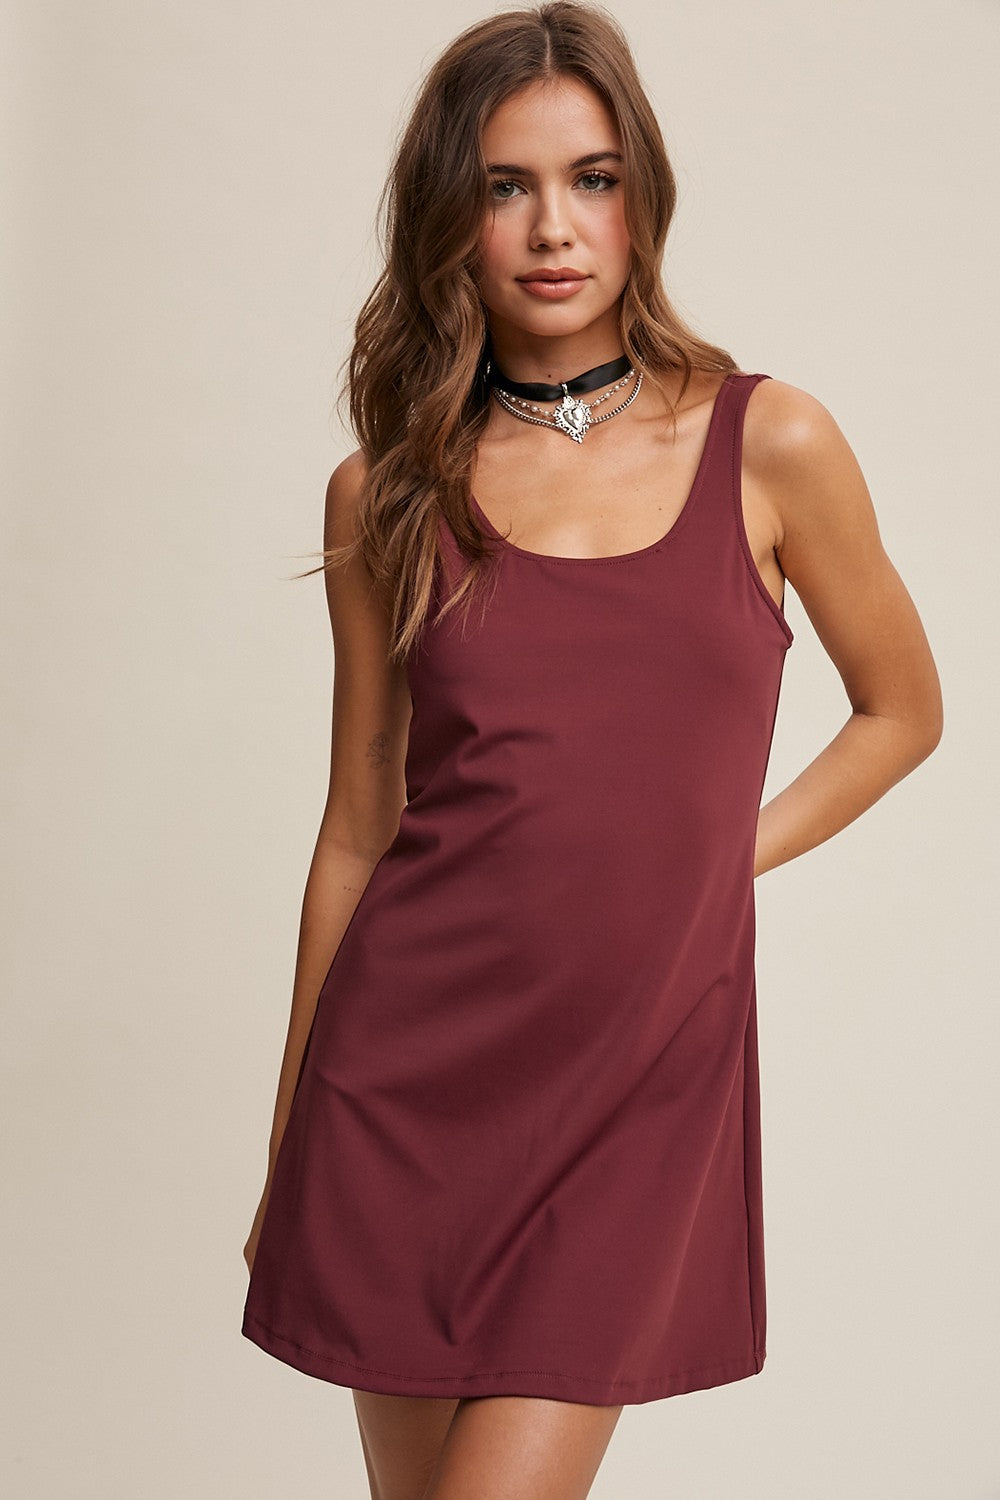 The Flare Active Dress